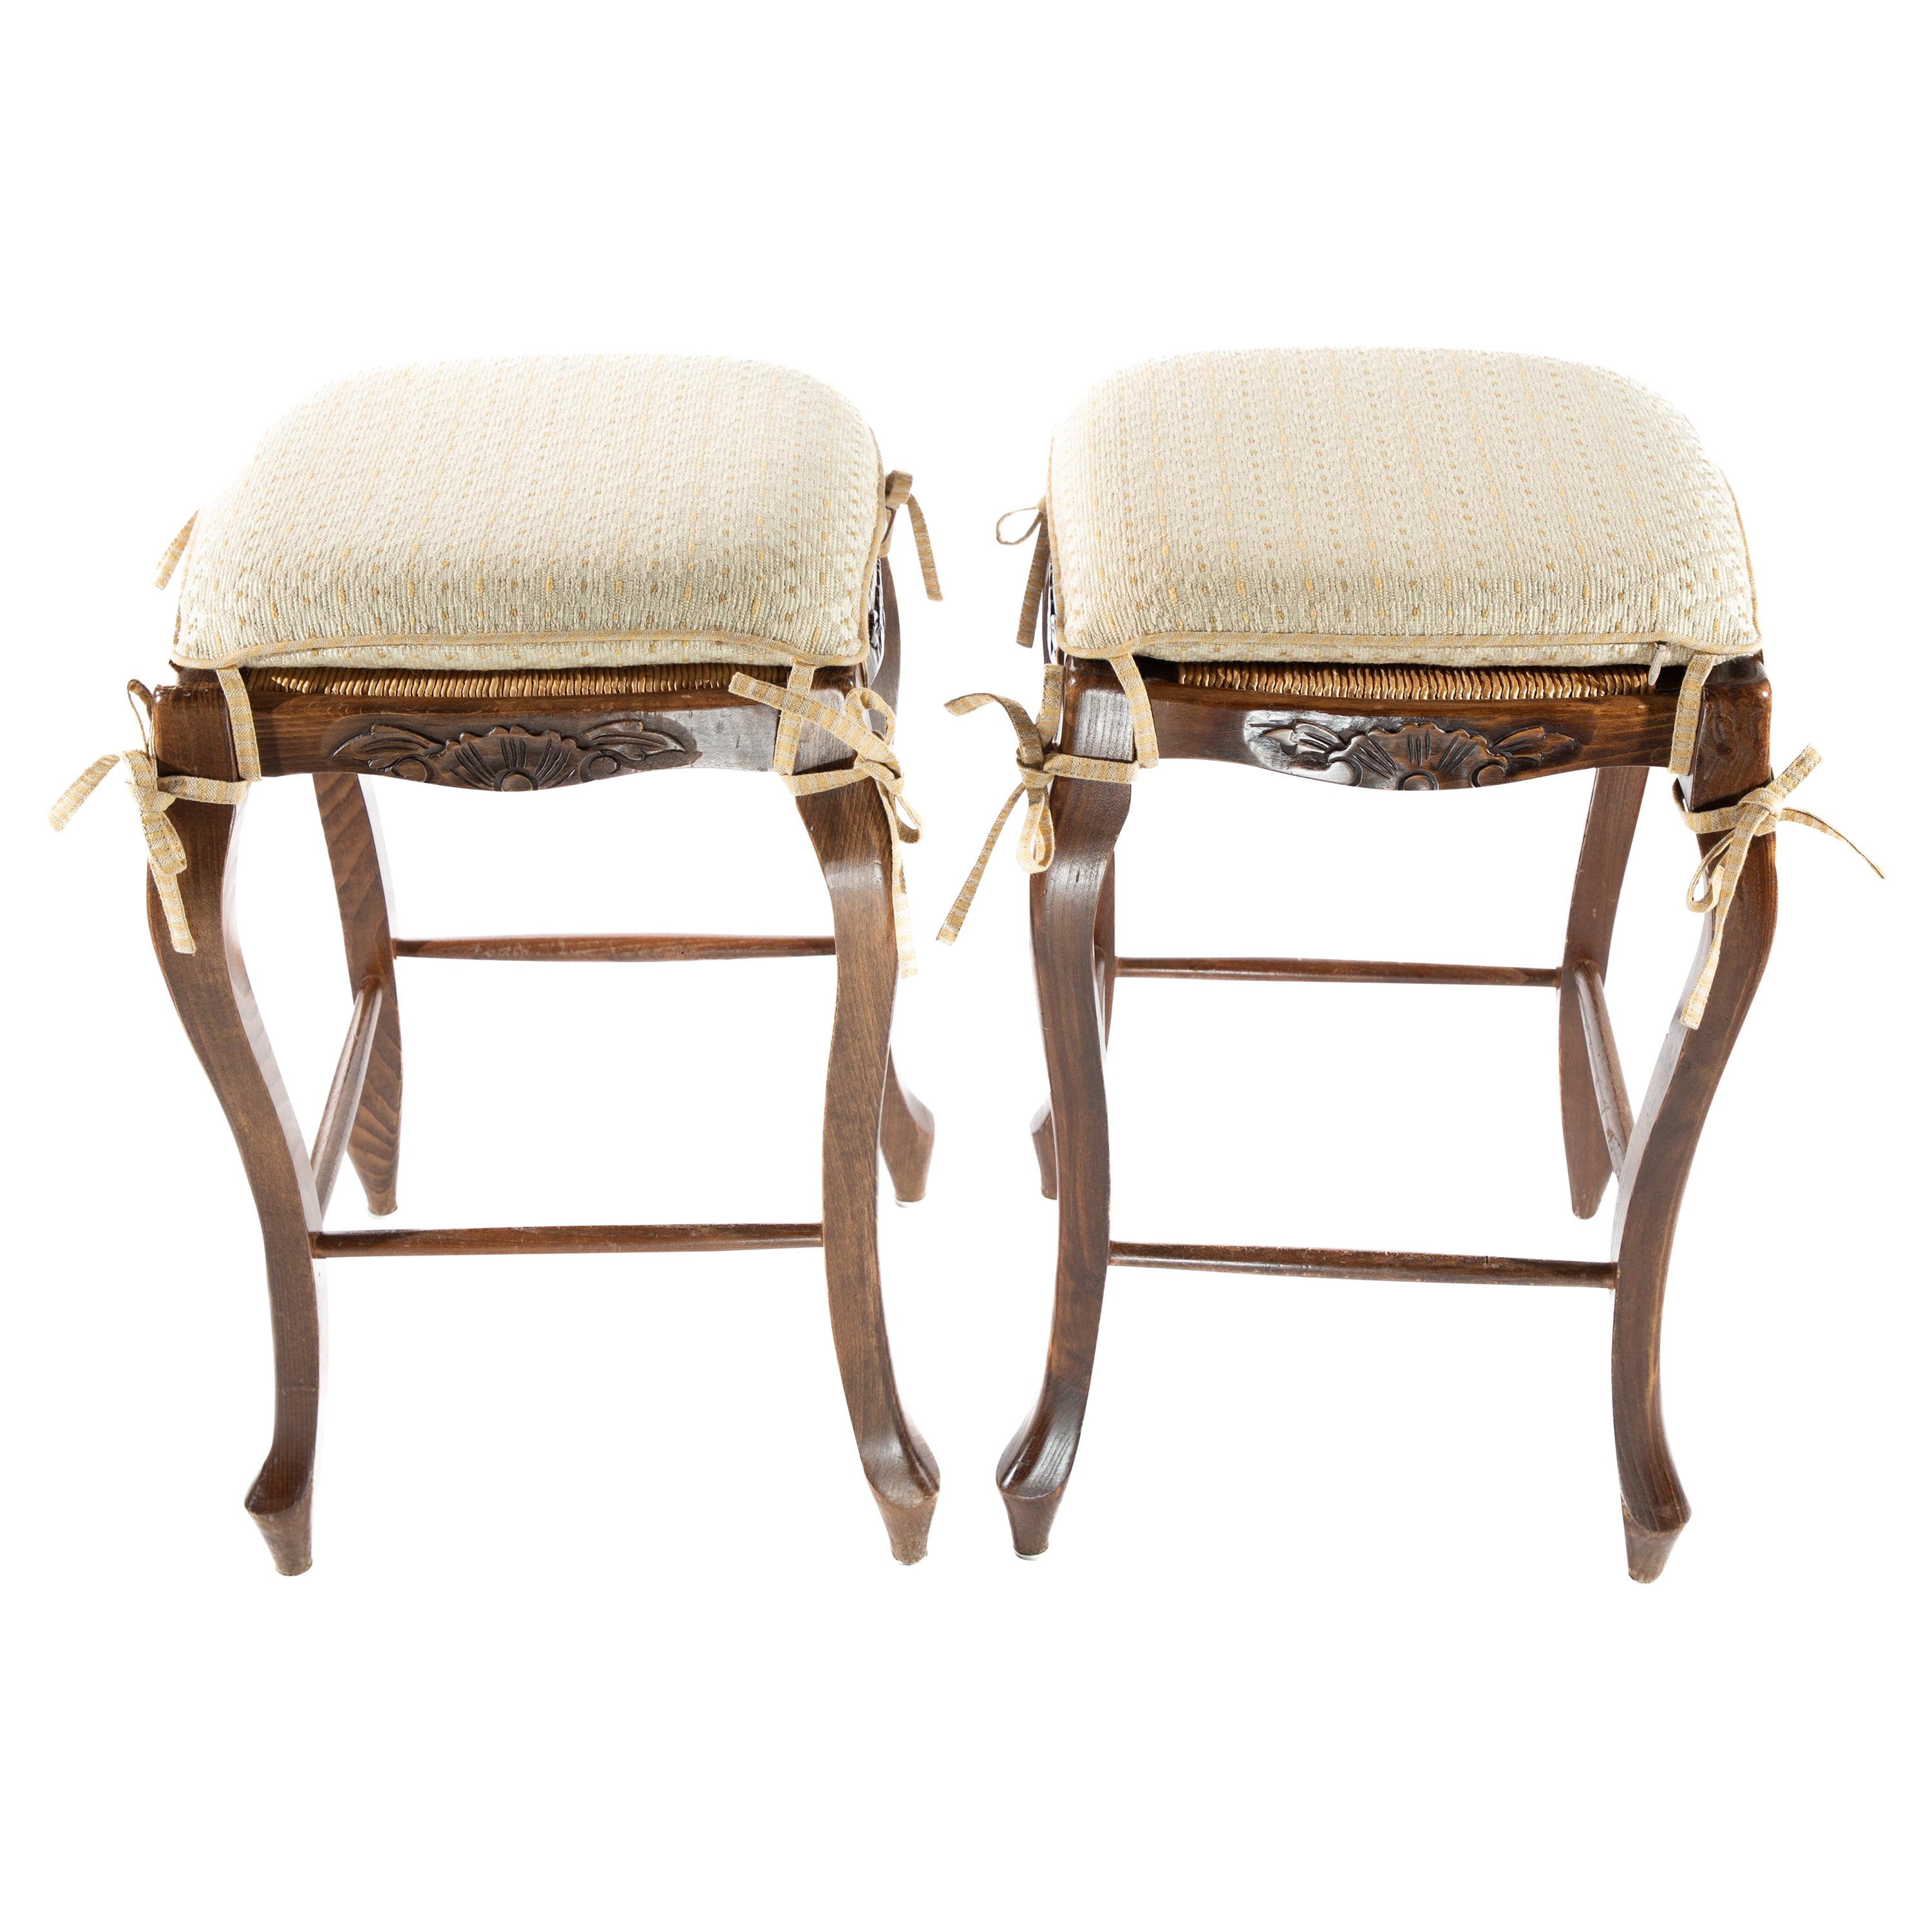 Pair of Wooden Barstools with Rush Woven Seats and Upholstered Cushions